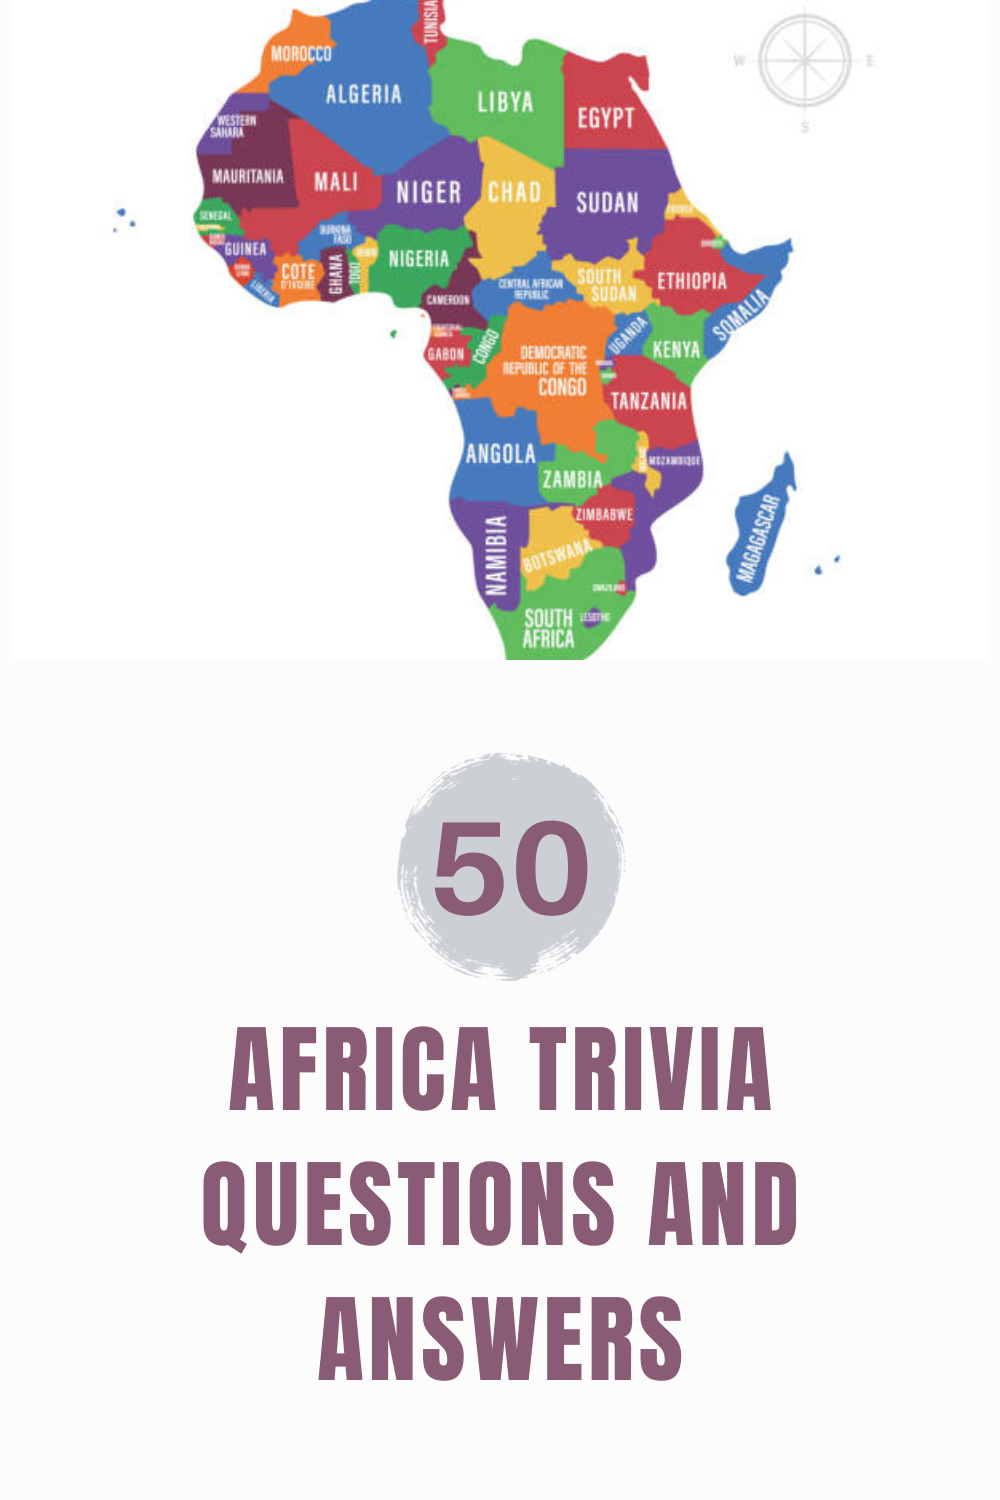 50 Africa Trivia Questions and Answers